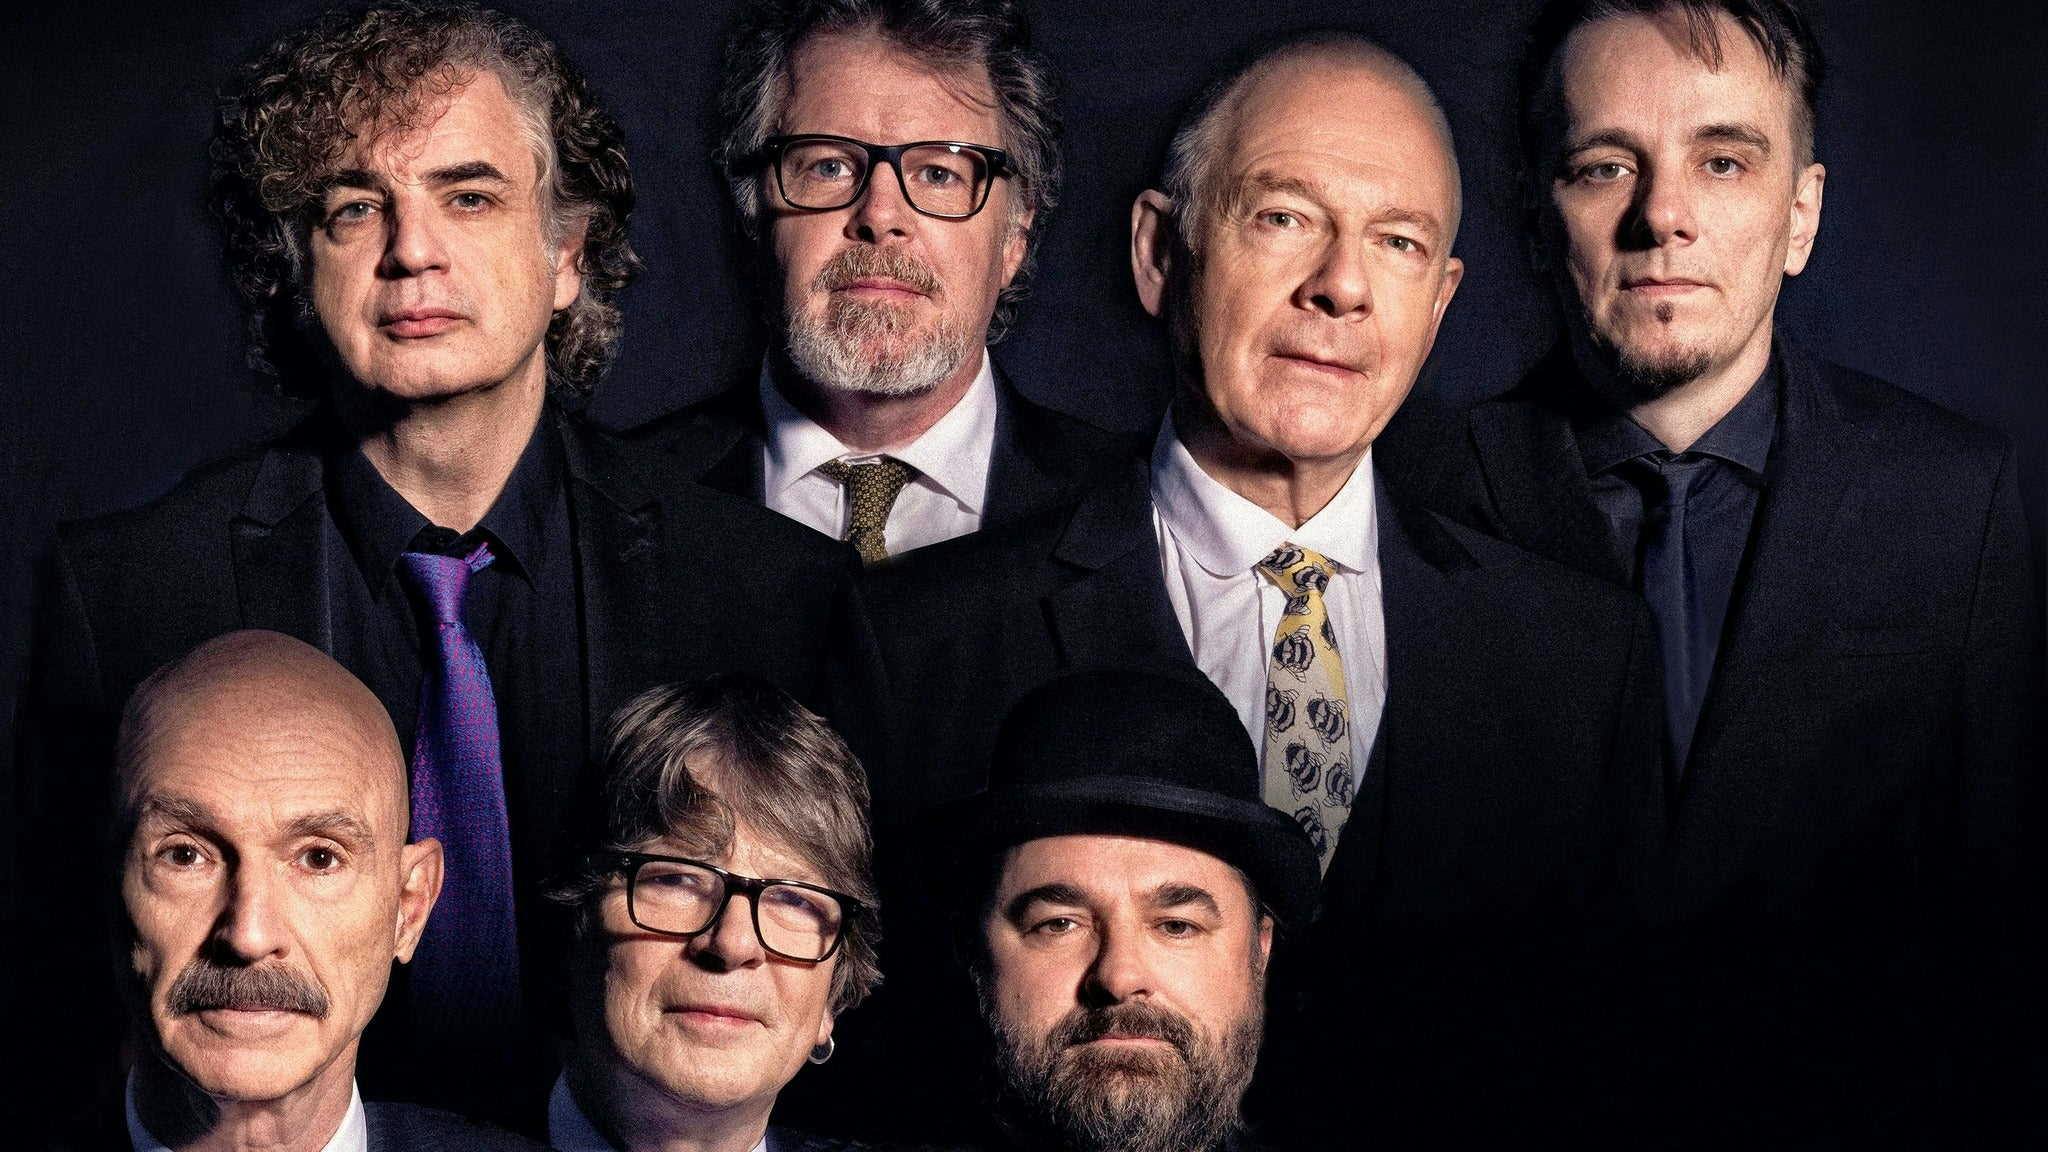 Best King Crimson Songs of All Time - Top 10 Tracks